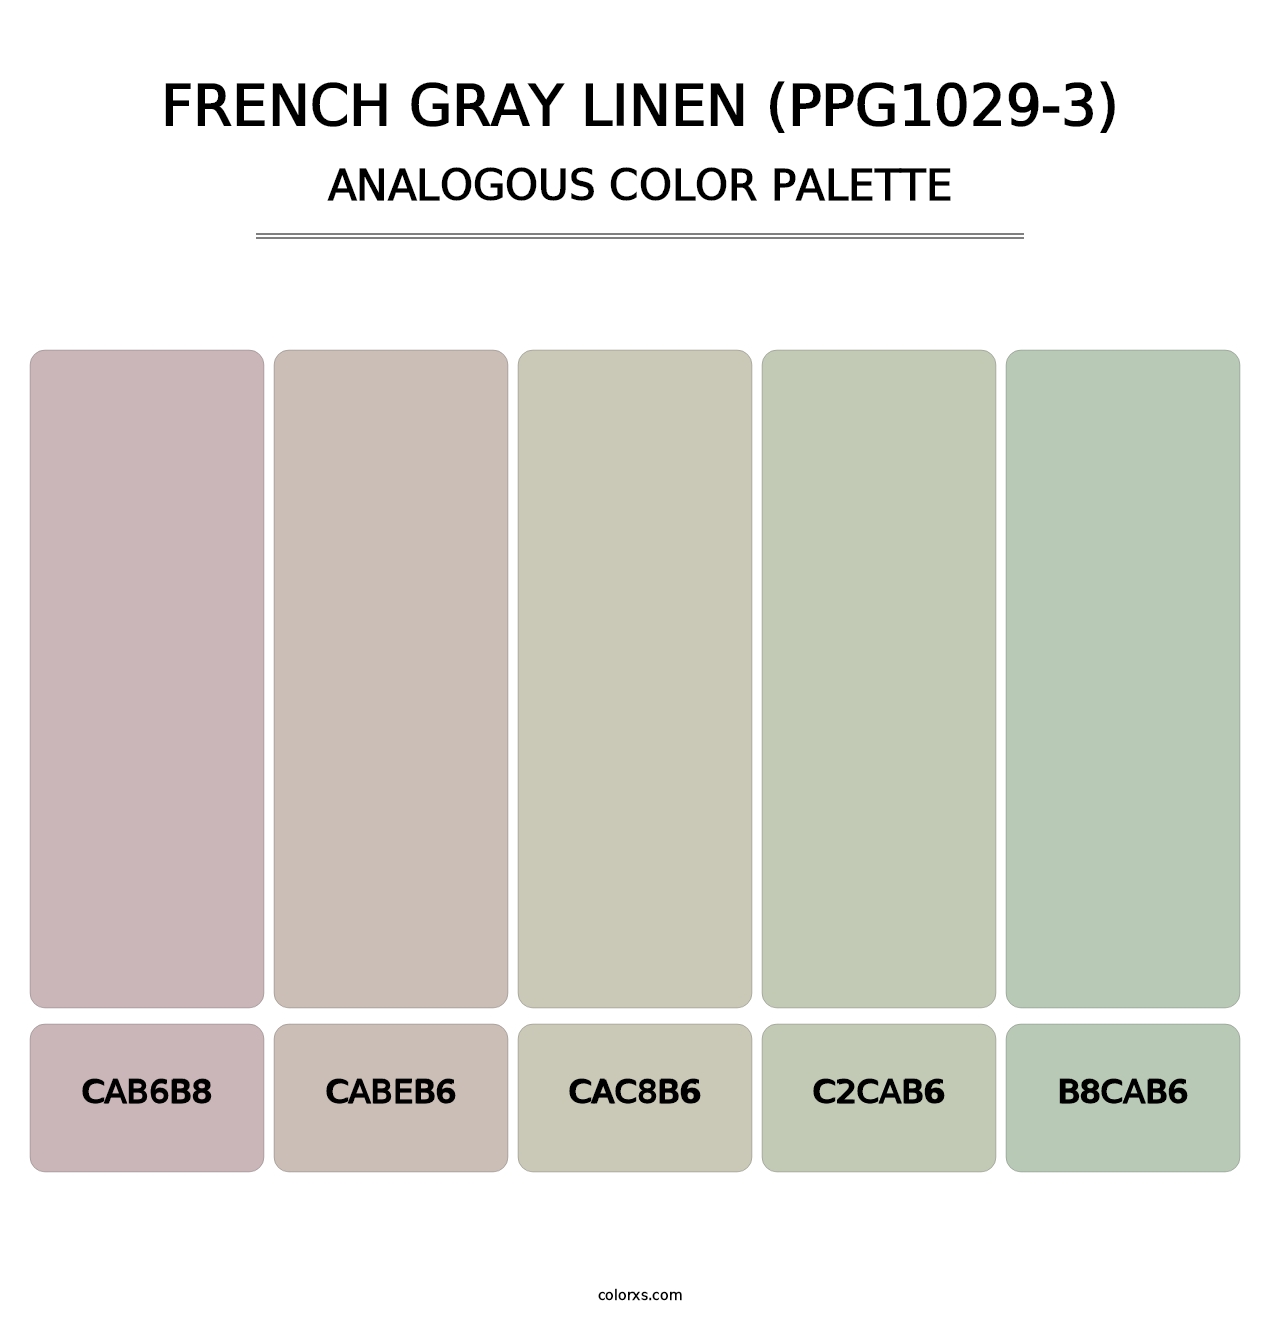 French Gray Linen (PPG1029-3) - Analogous Color Palette